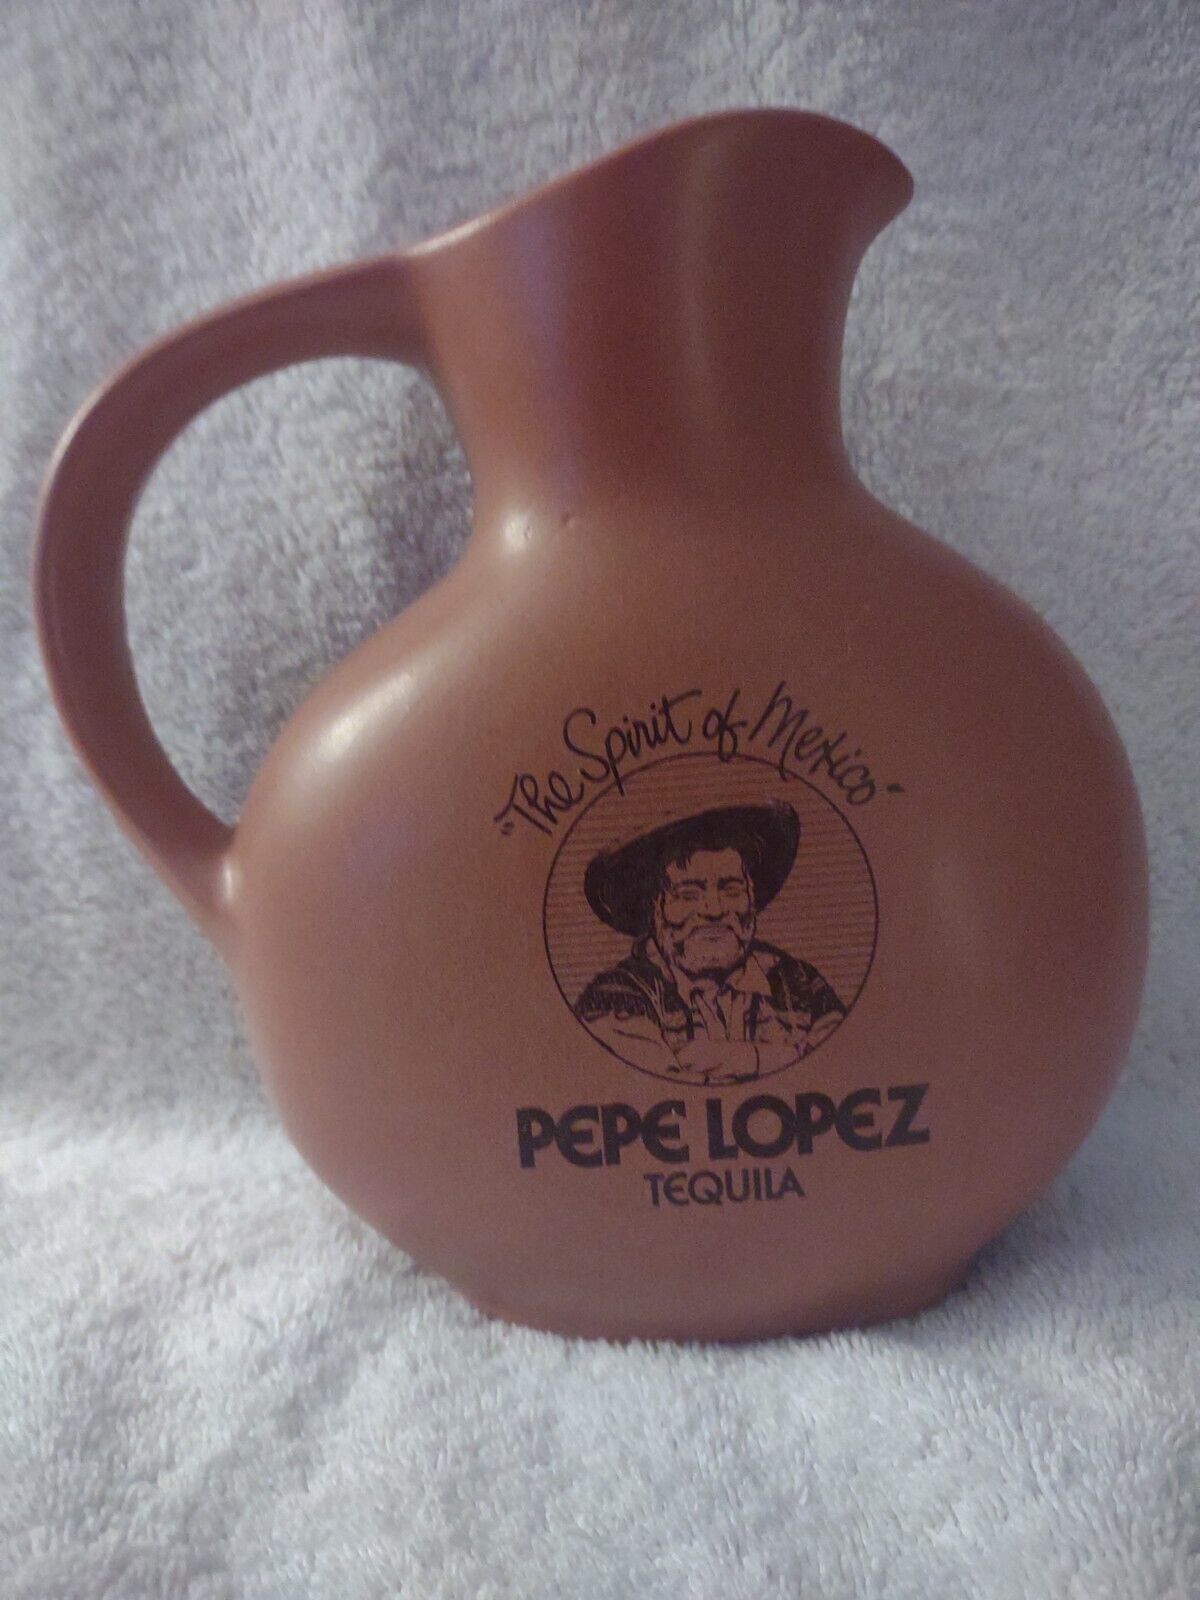 VTG Water Pitcher Vase Spirit of Mexico Jug Pepe Lopez Tequila Bar Clay Jose’s